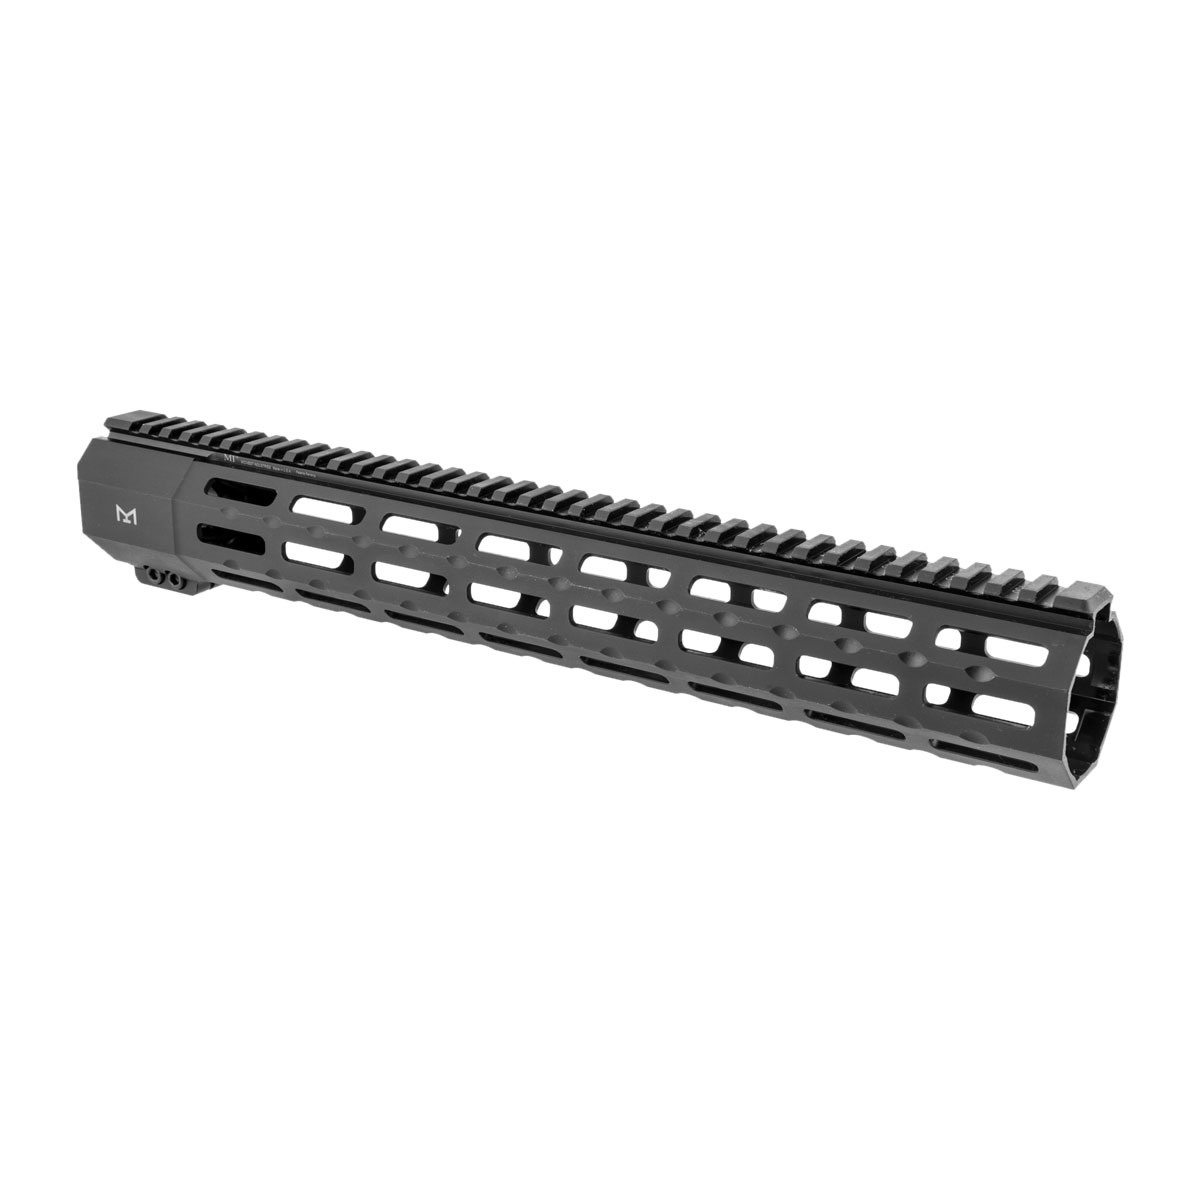 MIDWEST INDUSTRIES, INC. RUGER® PRECISION HANDGUARDS,M-LOK | Brownells